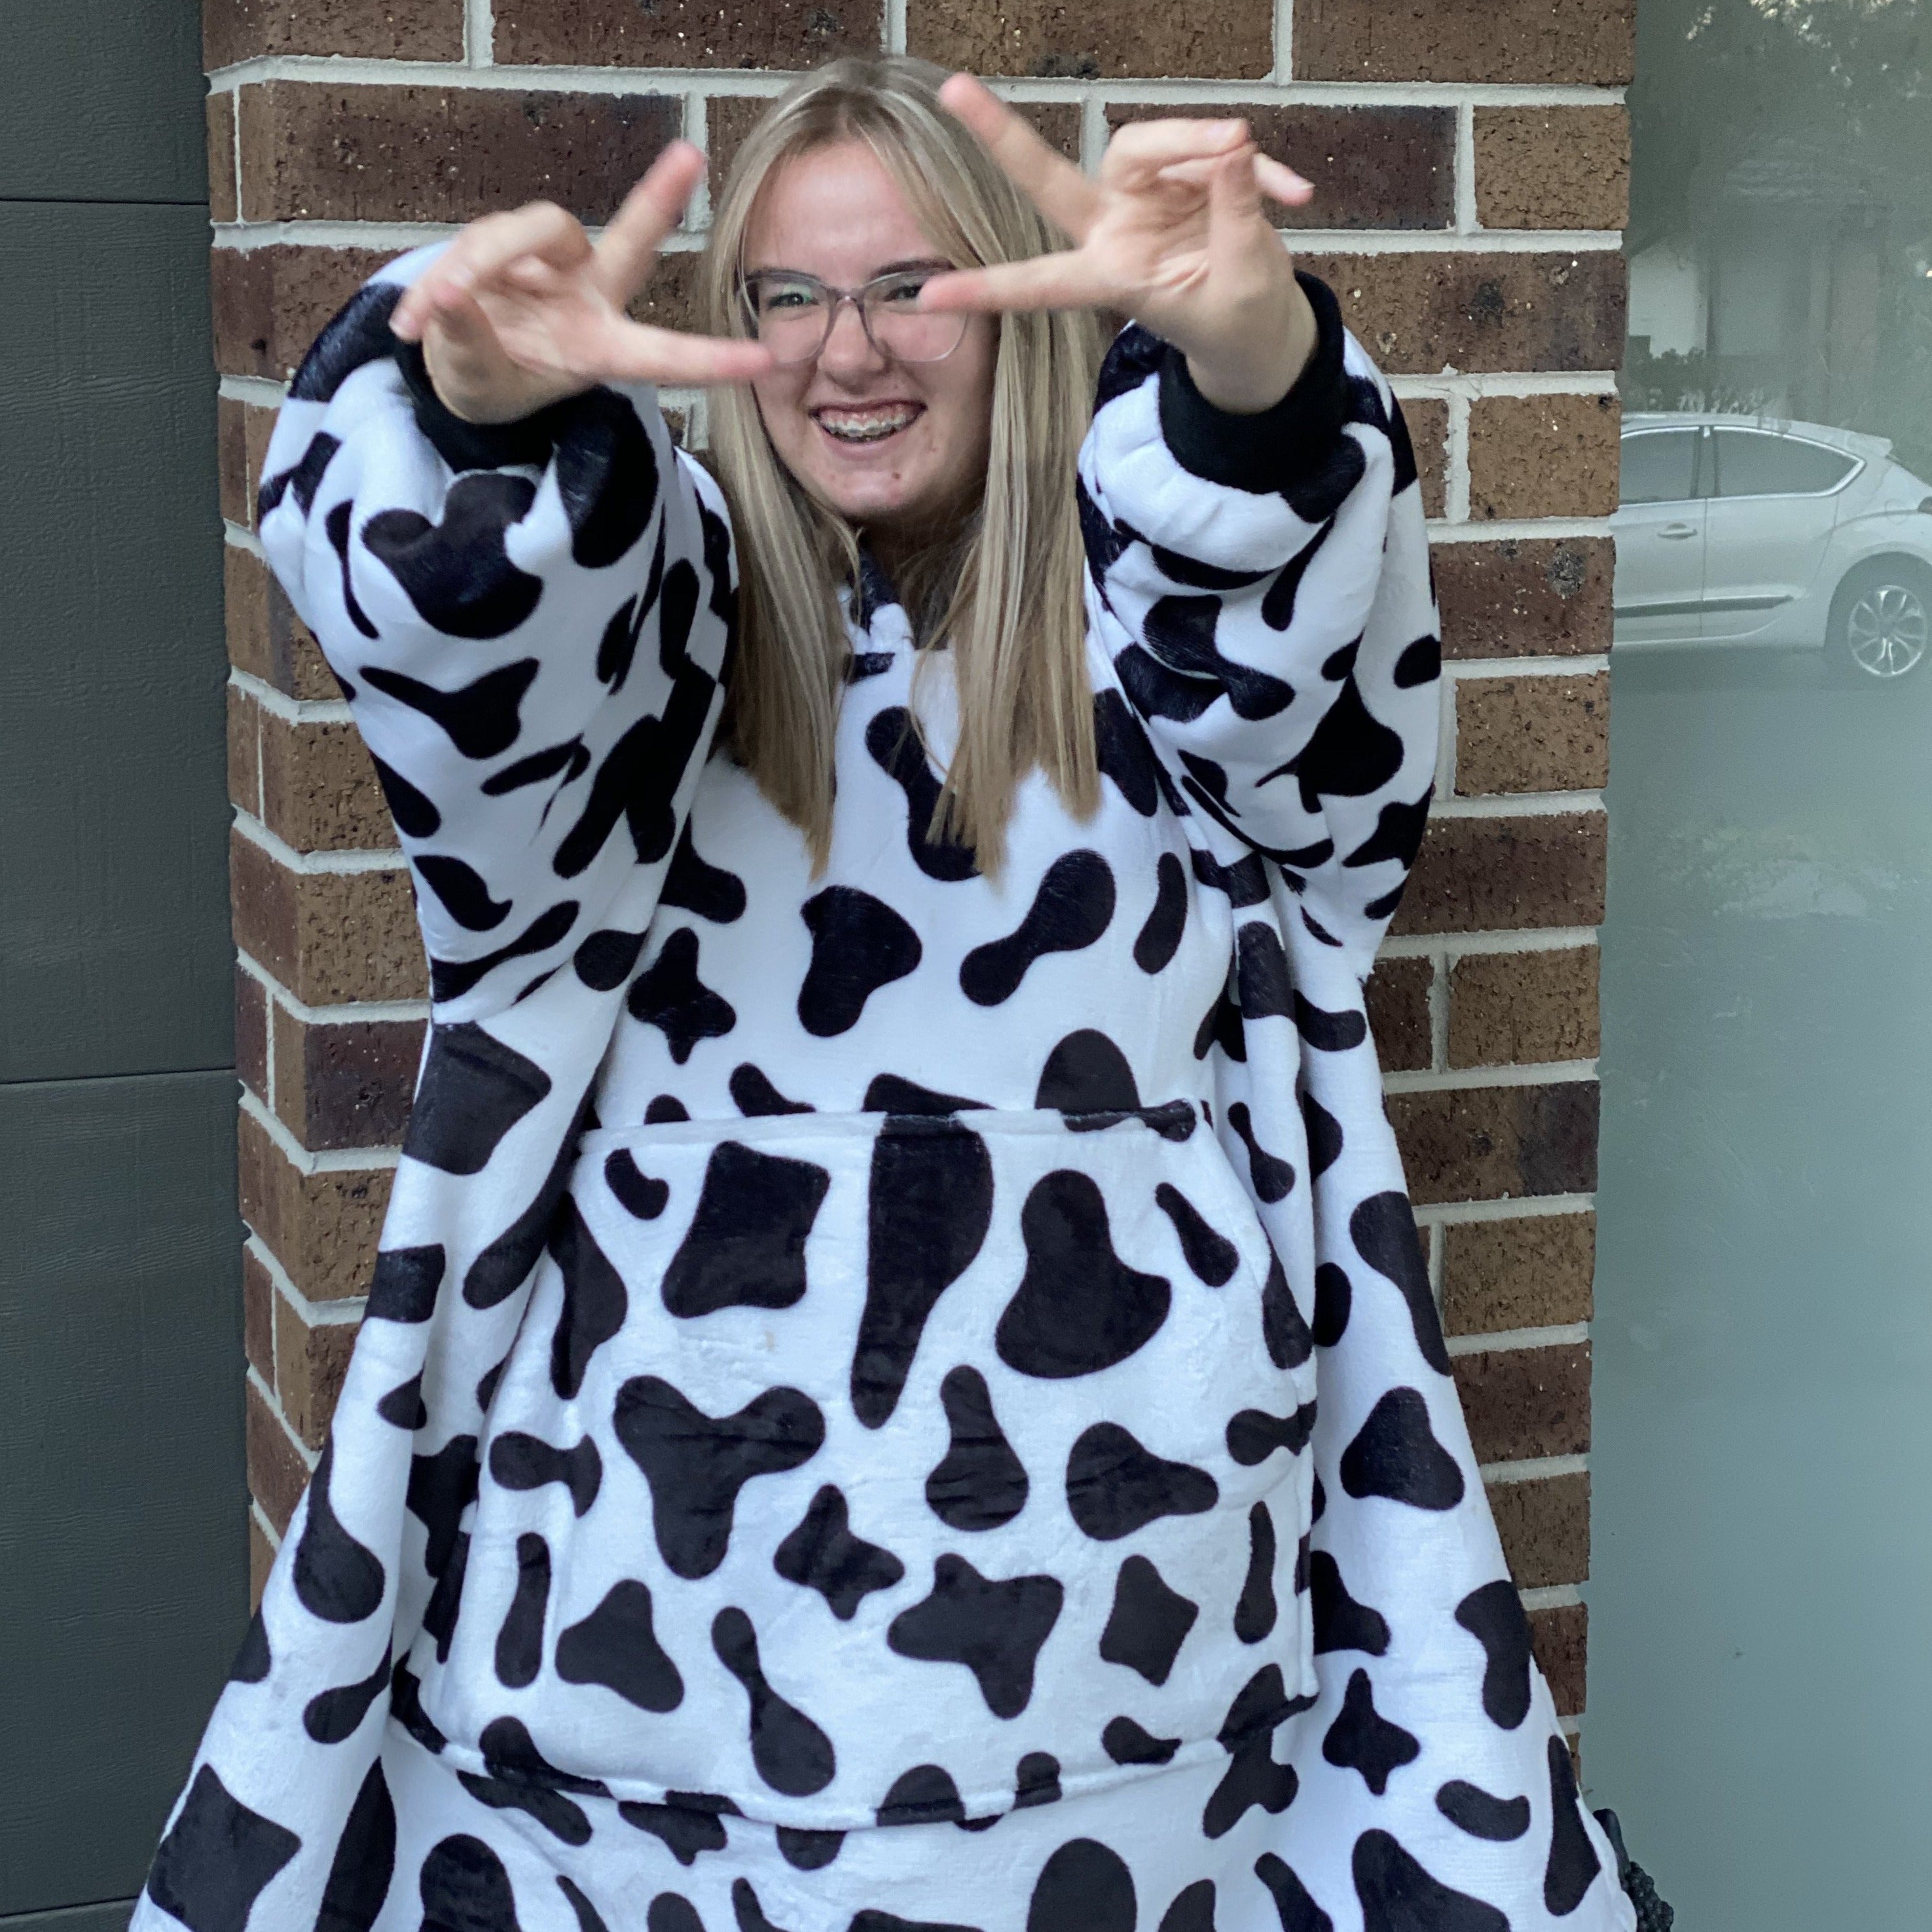 Hooded Cosy - Adult Cow